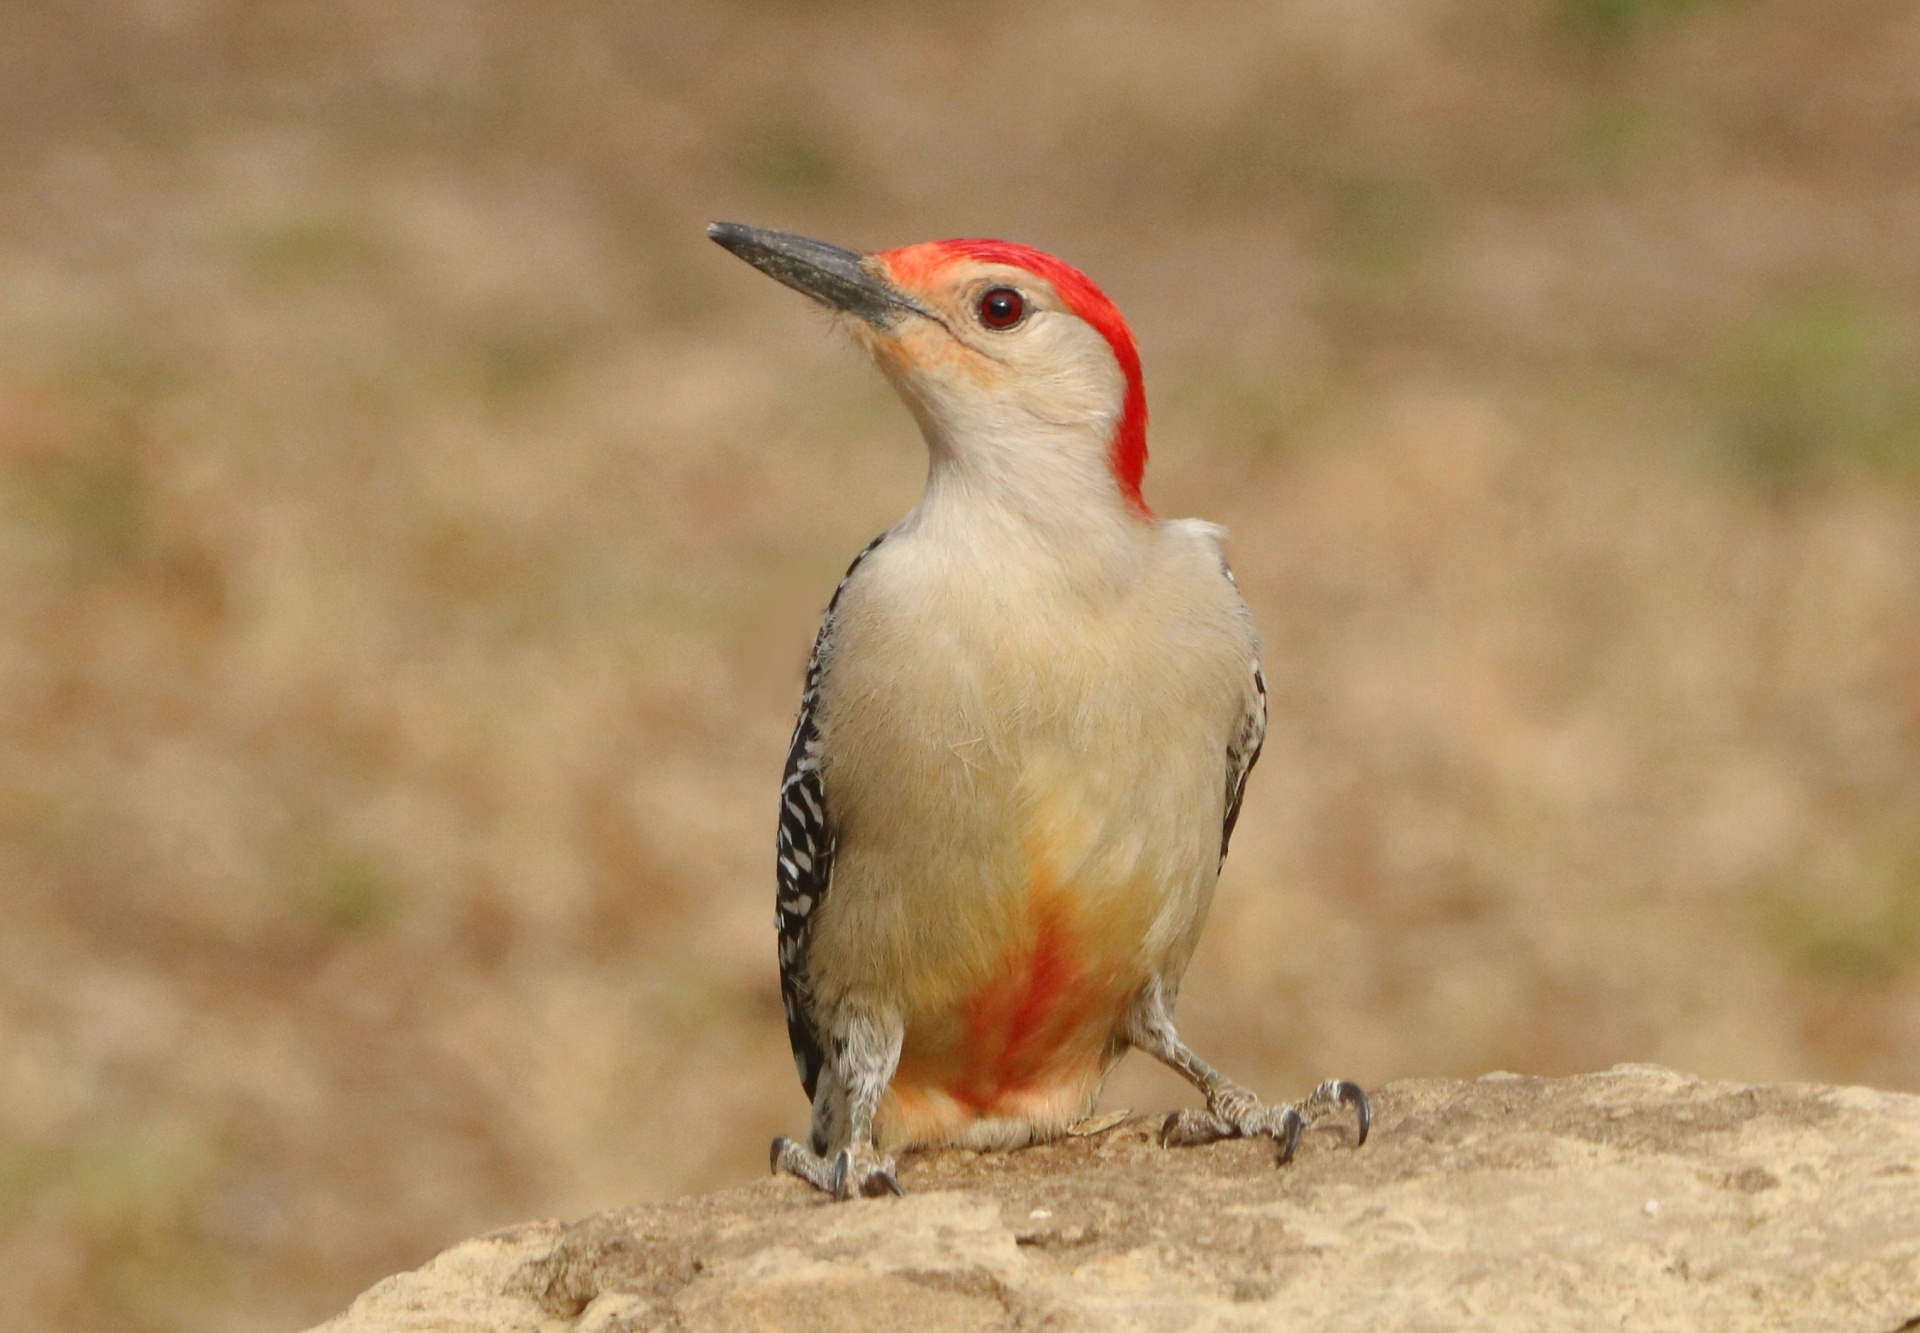 Close-up portrait of a red-bellied woodpecker, perched on a rock, showing his red belly feathers.